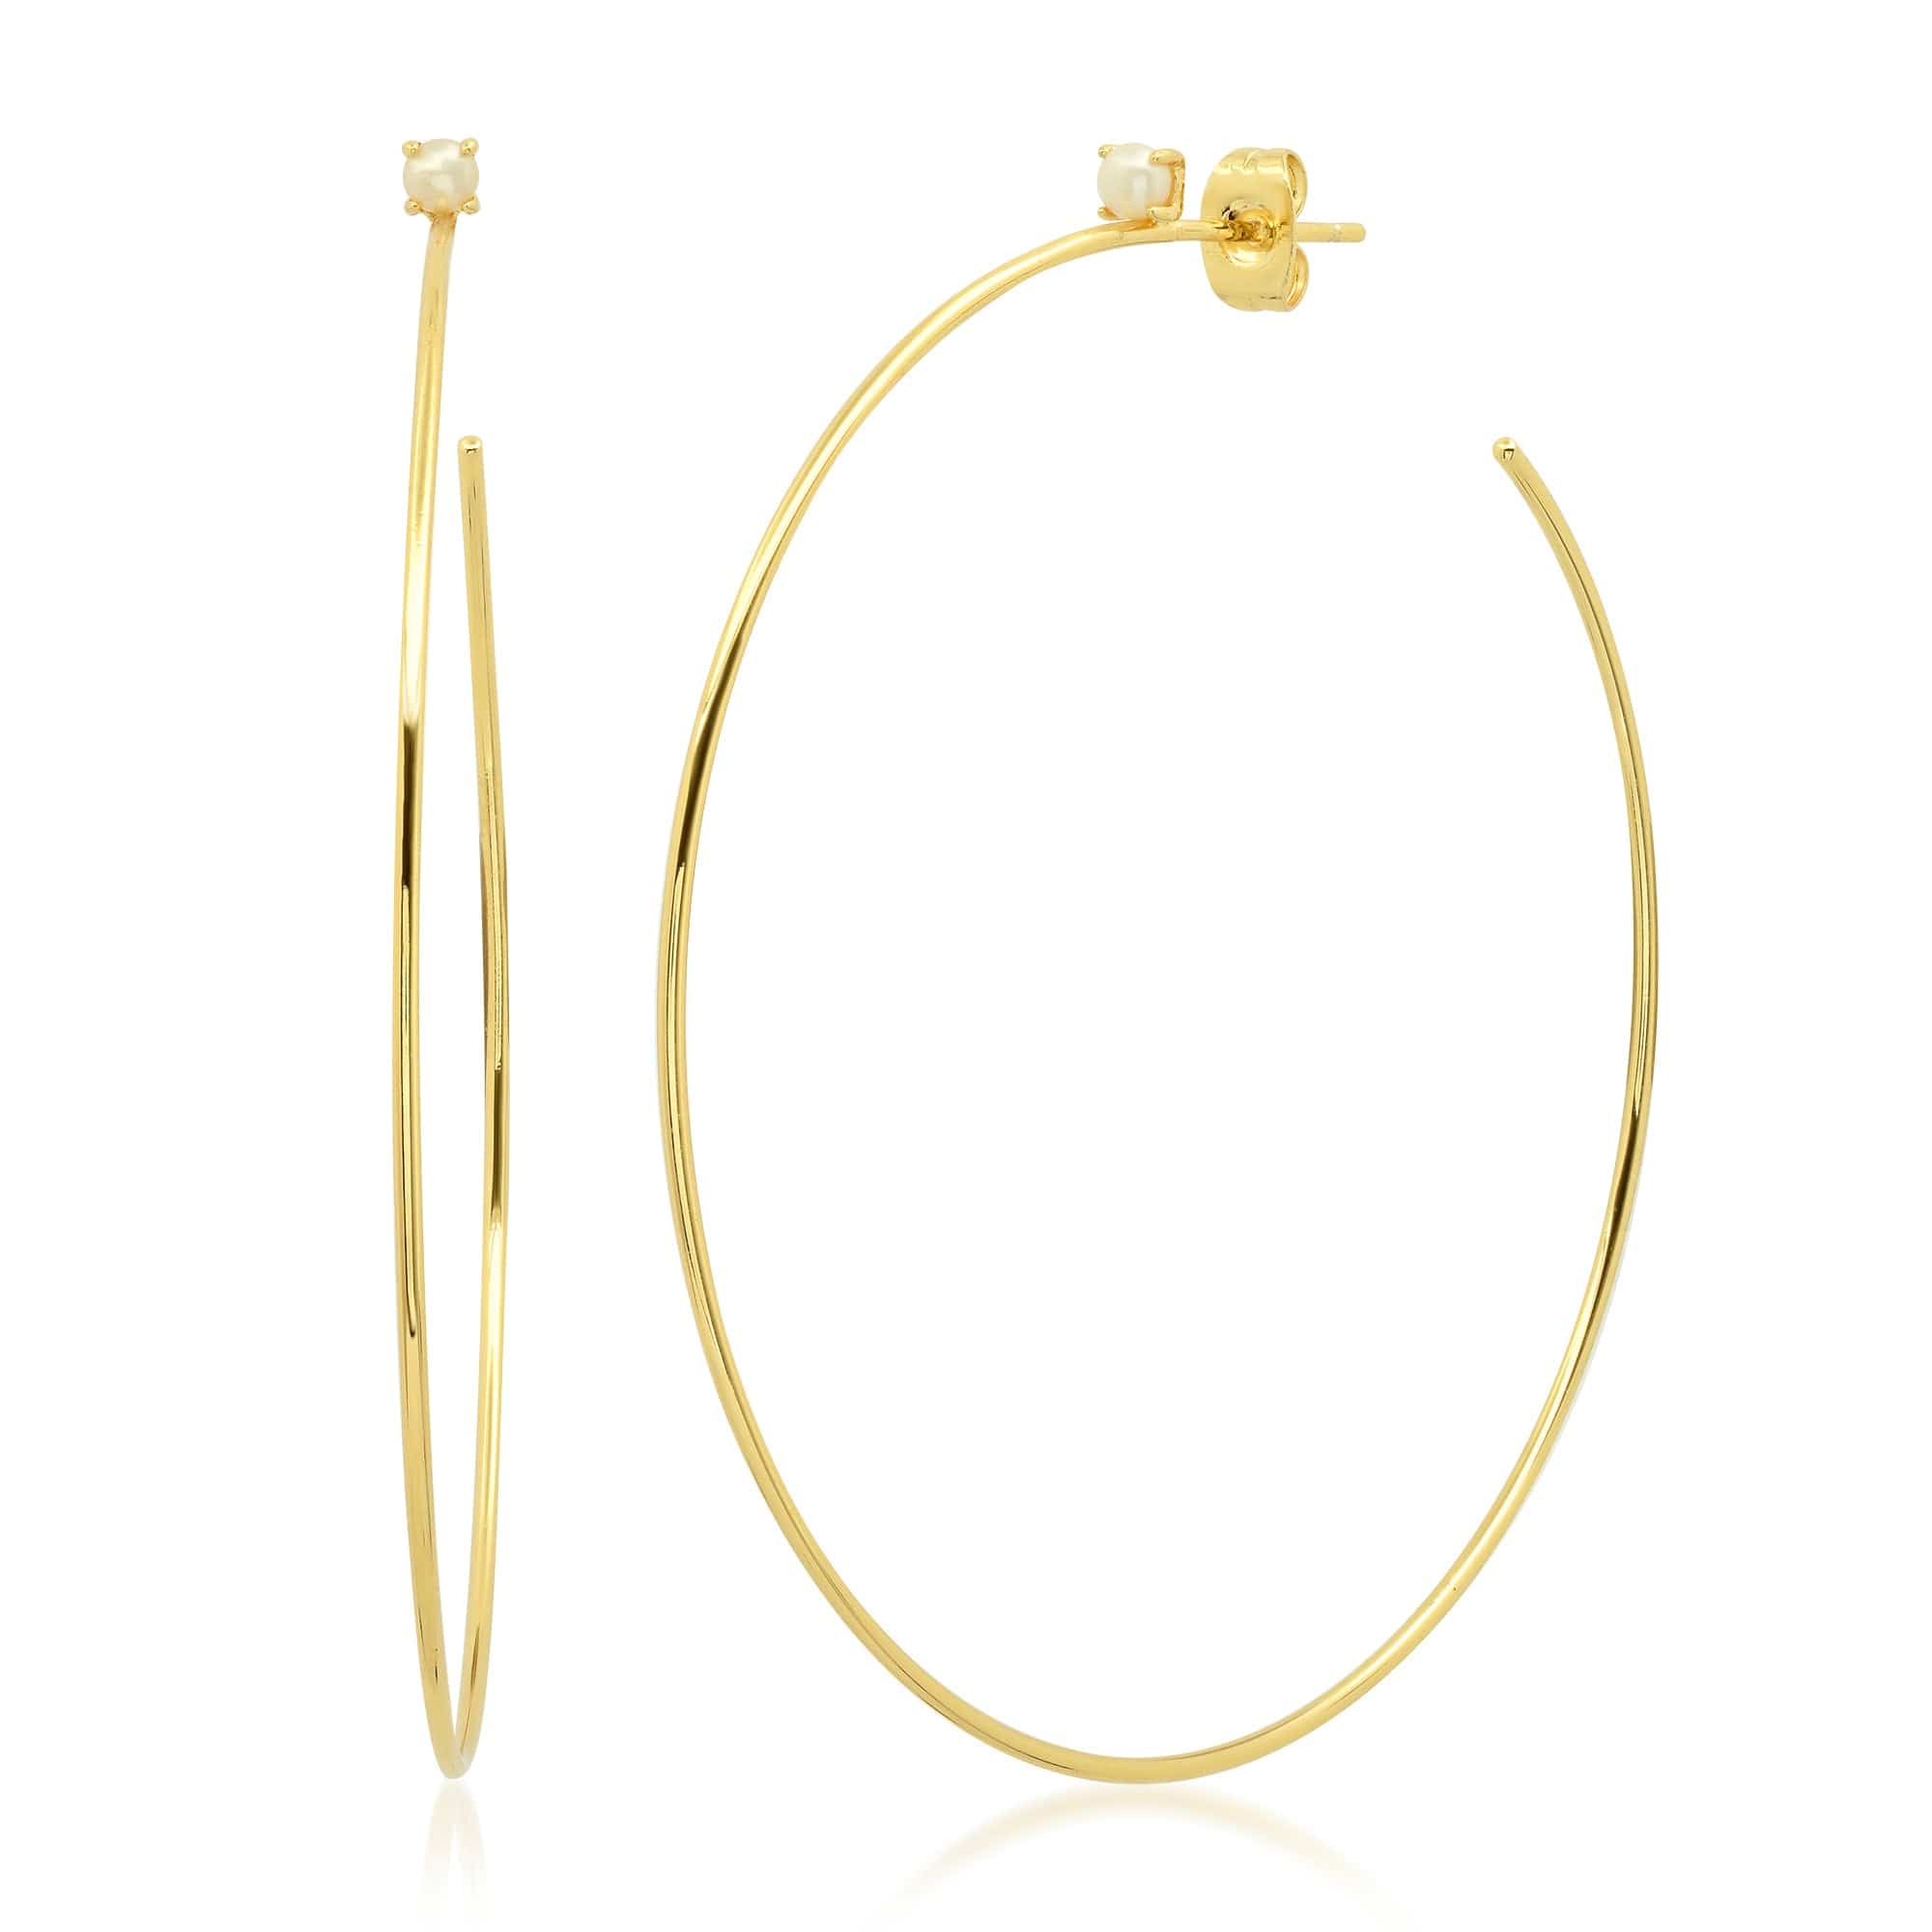 TAI JEWELRY Earrings Large Gold Hoop With Pearl Stud